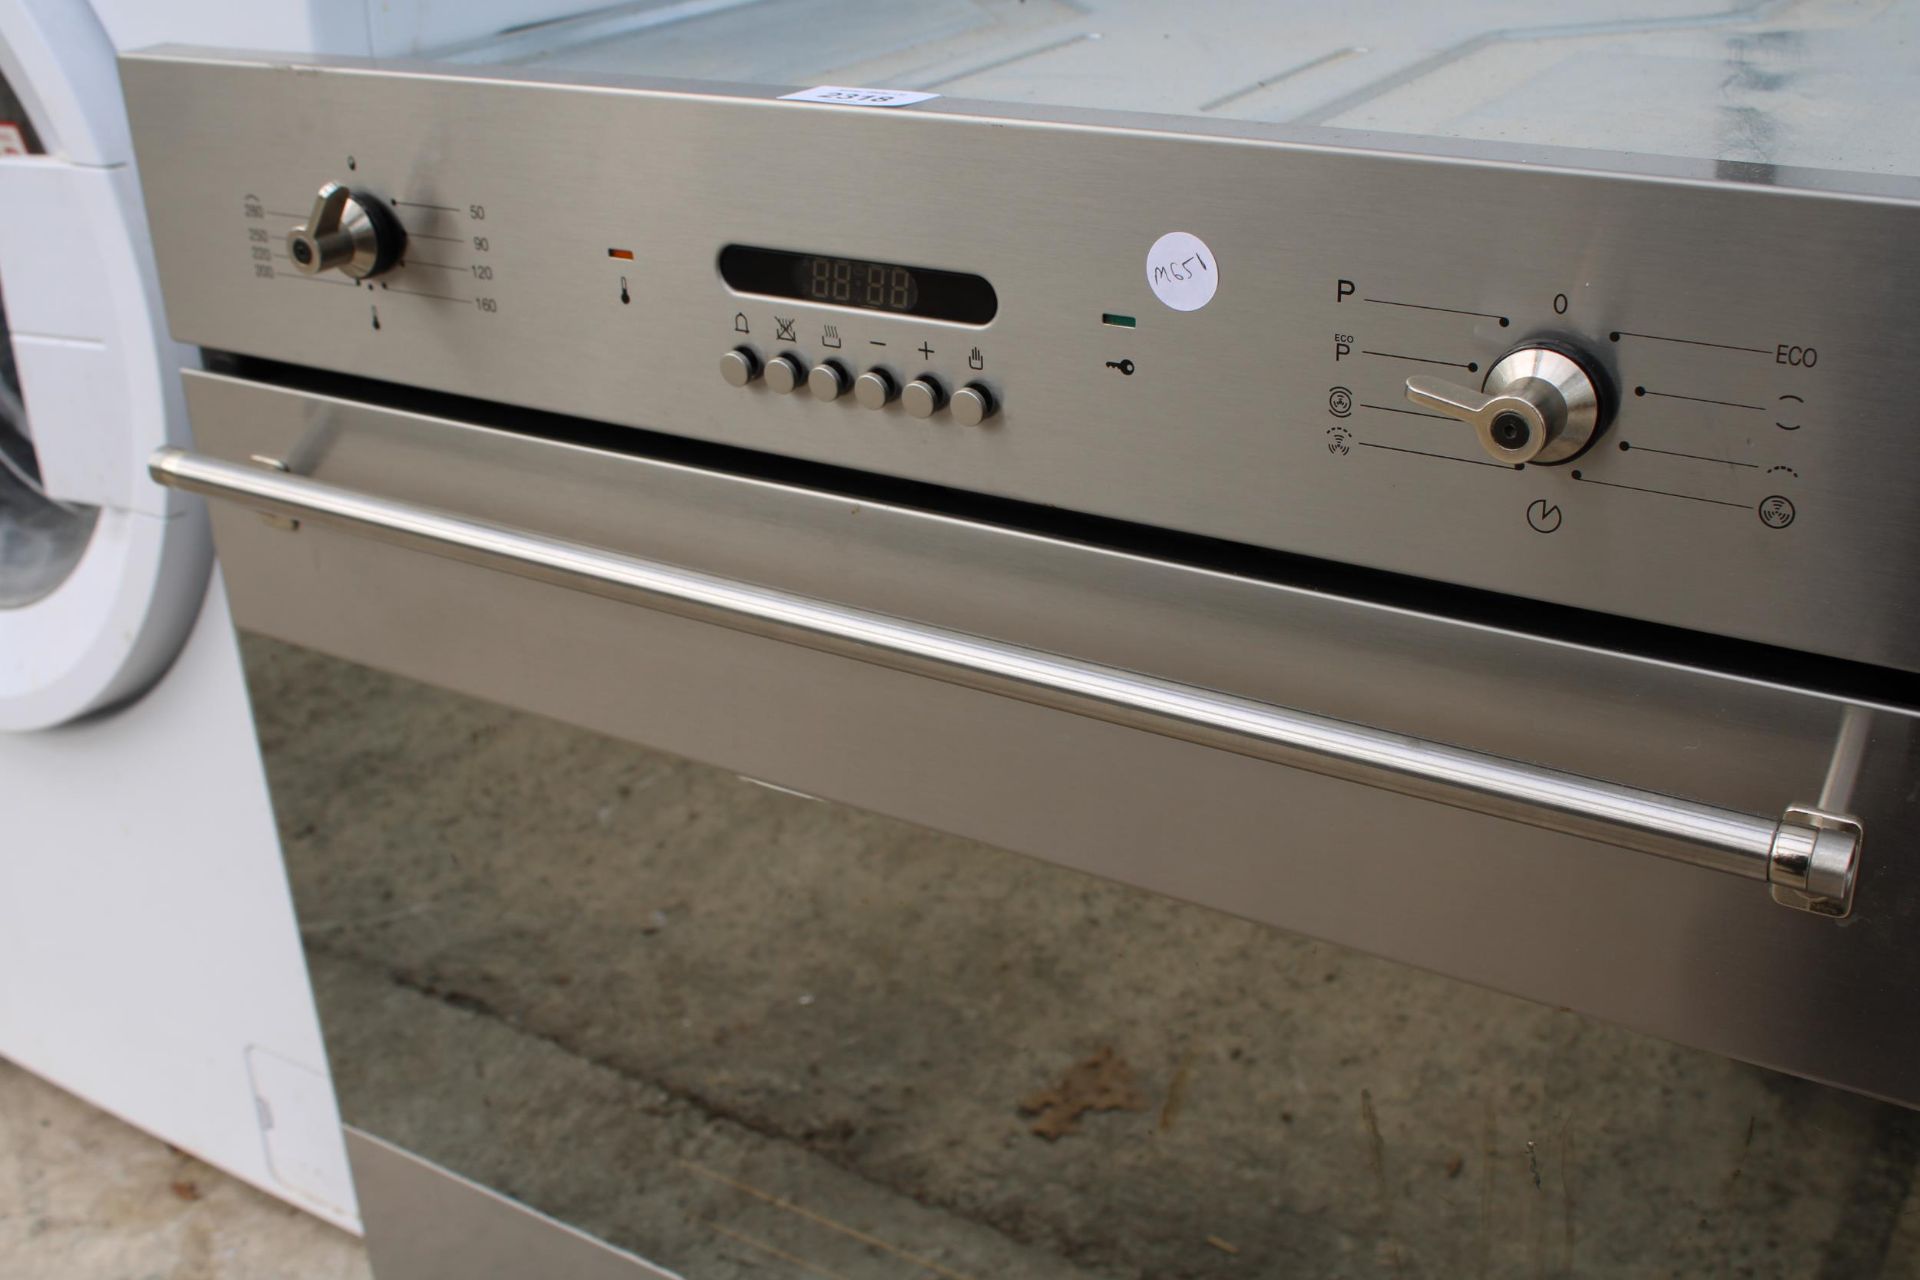 A SILVER SMEG INTERGRATED OVEN - Image 2 of 3